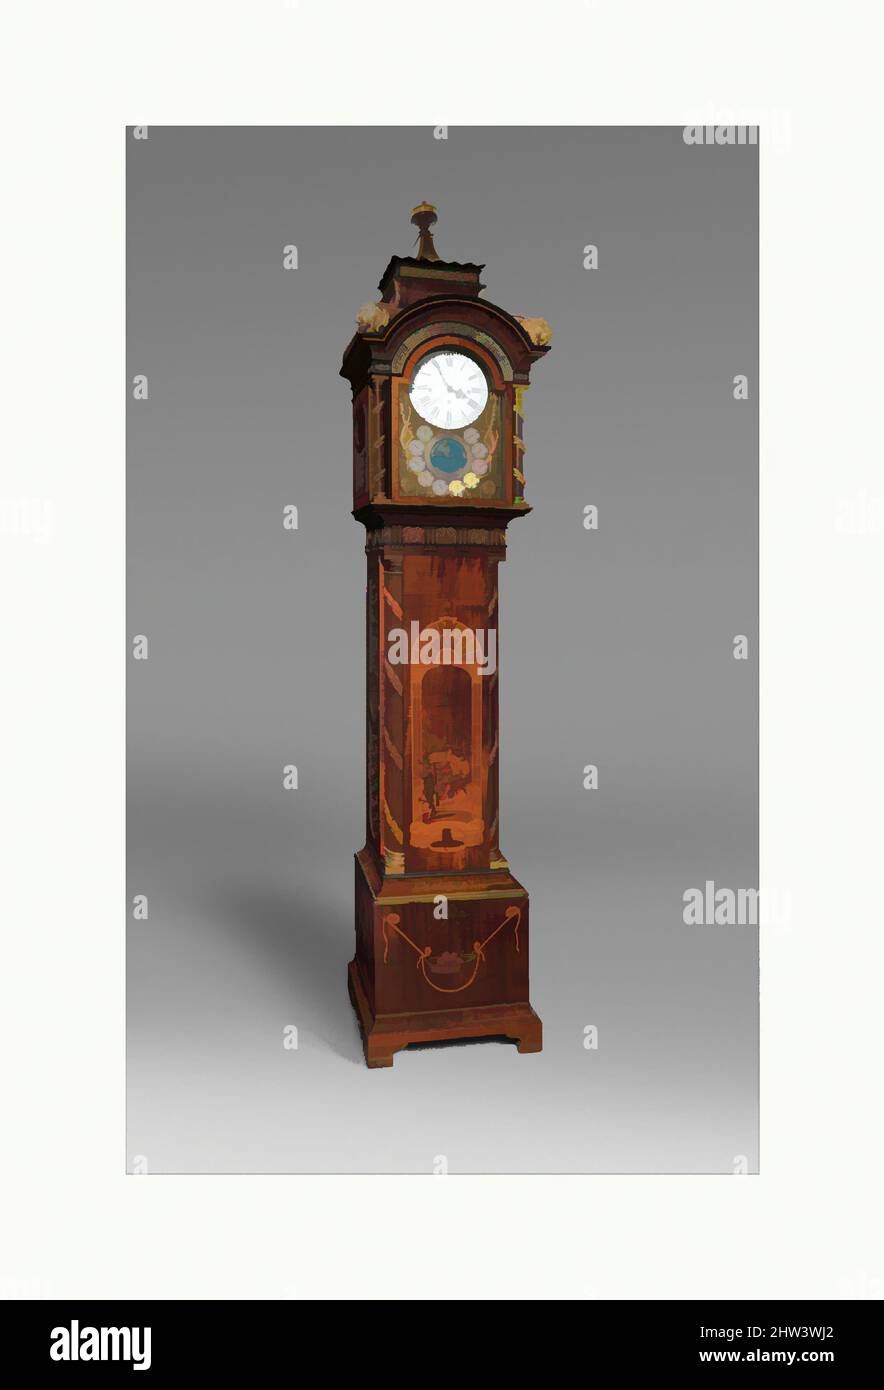 Art inspired by Longcase clock, Clockmaker: Hermann Achenbach (German, born 1730, active before 1759–92), Clockmaker: Johann Schmidt (German, 1735–1795), Case by David Roentgen (German, Herrnhaag 1743–1807 Wiesbaden, master 1780), Marquetry panel by Reusch, ca. 1774–75, German, Neuwied, Classic works modernized by Artotop with a splash of modernity. Shapes, color and value, eye-catching visual impact on art. Emotions through freedom of artworks in a contemporary way. A timeless message pursuing a wildly creative new direction. Artists turning to the digital medium and creating the Artotop NFT Stock Photo